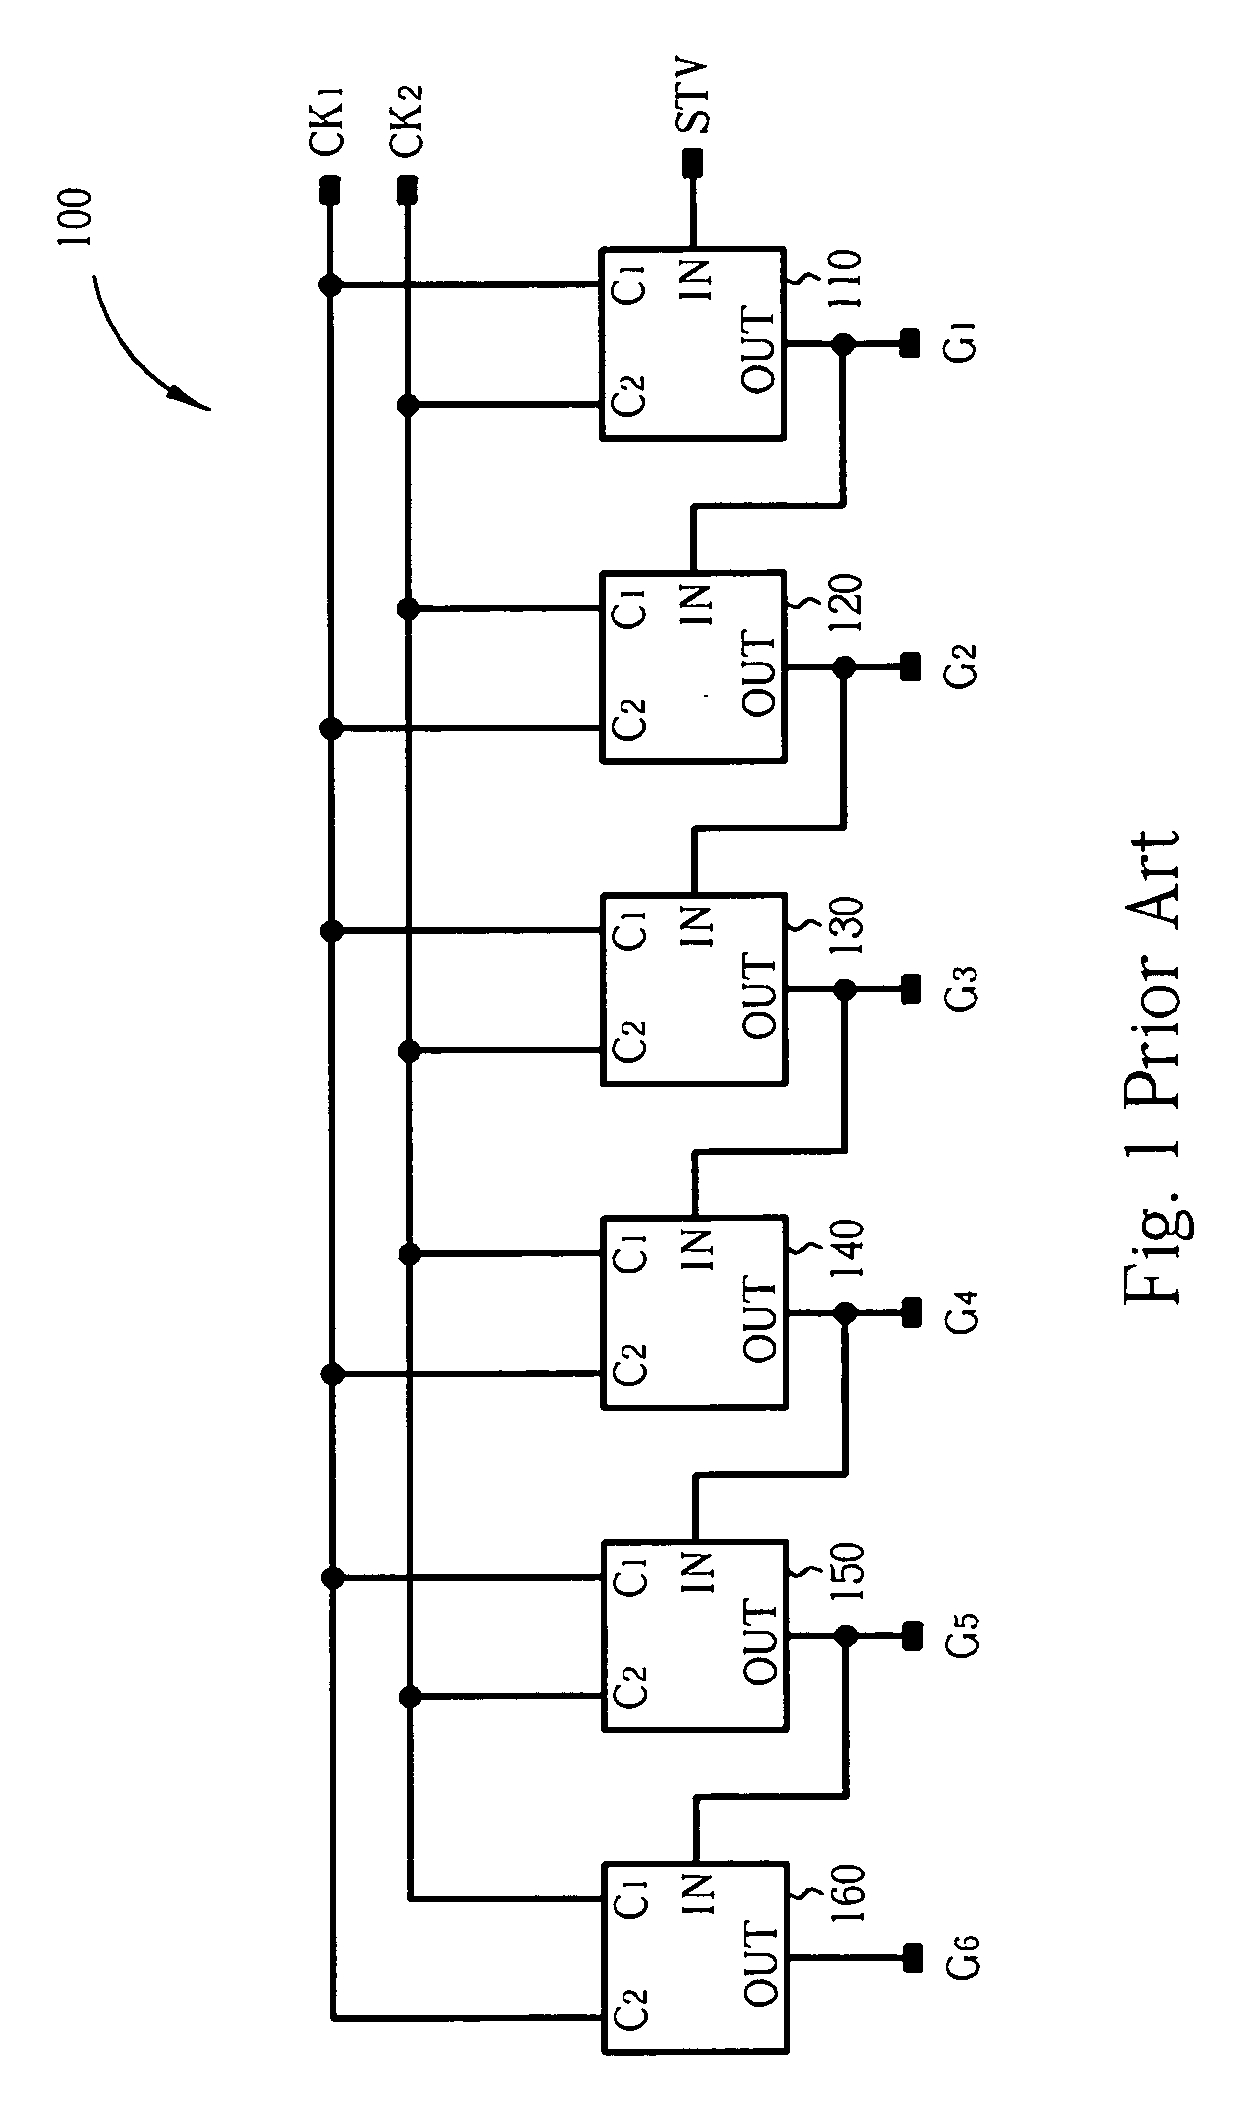 Systems for displaying images by utilizing vertical shift register circuit to generate non-overlapped output signals